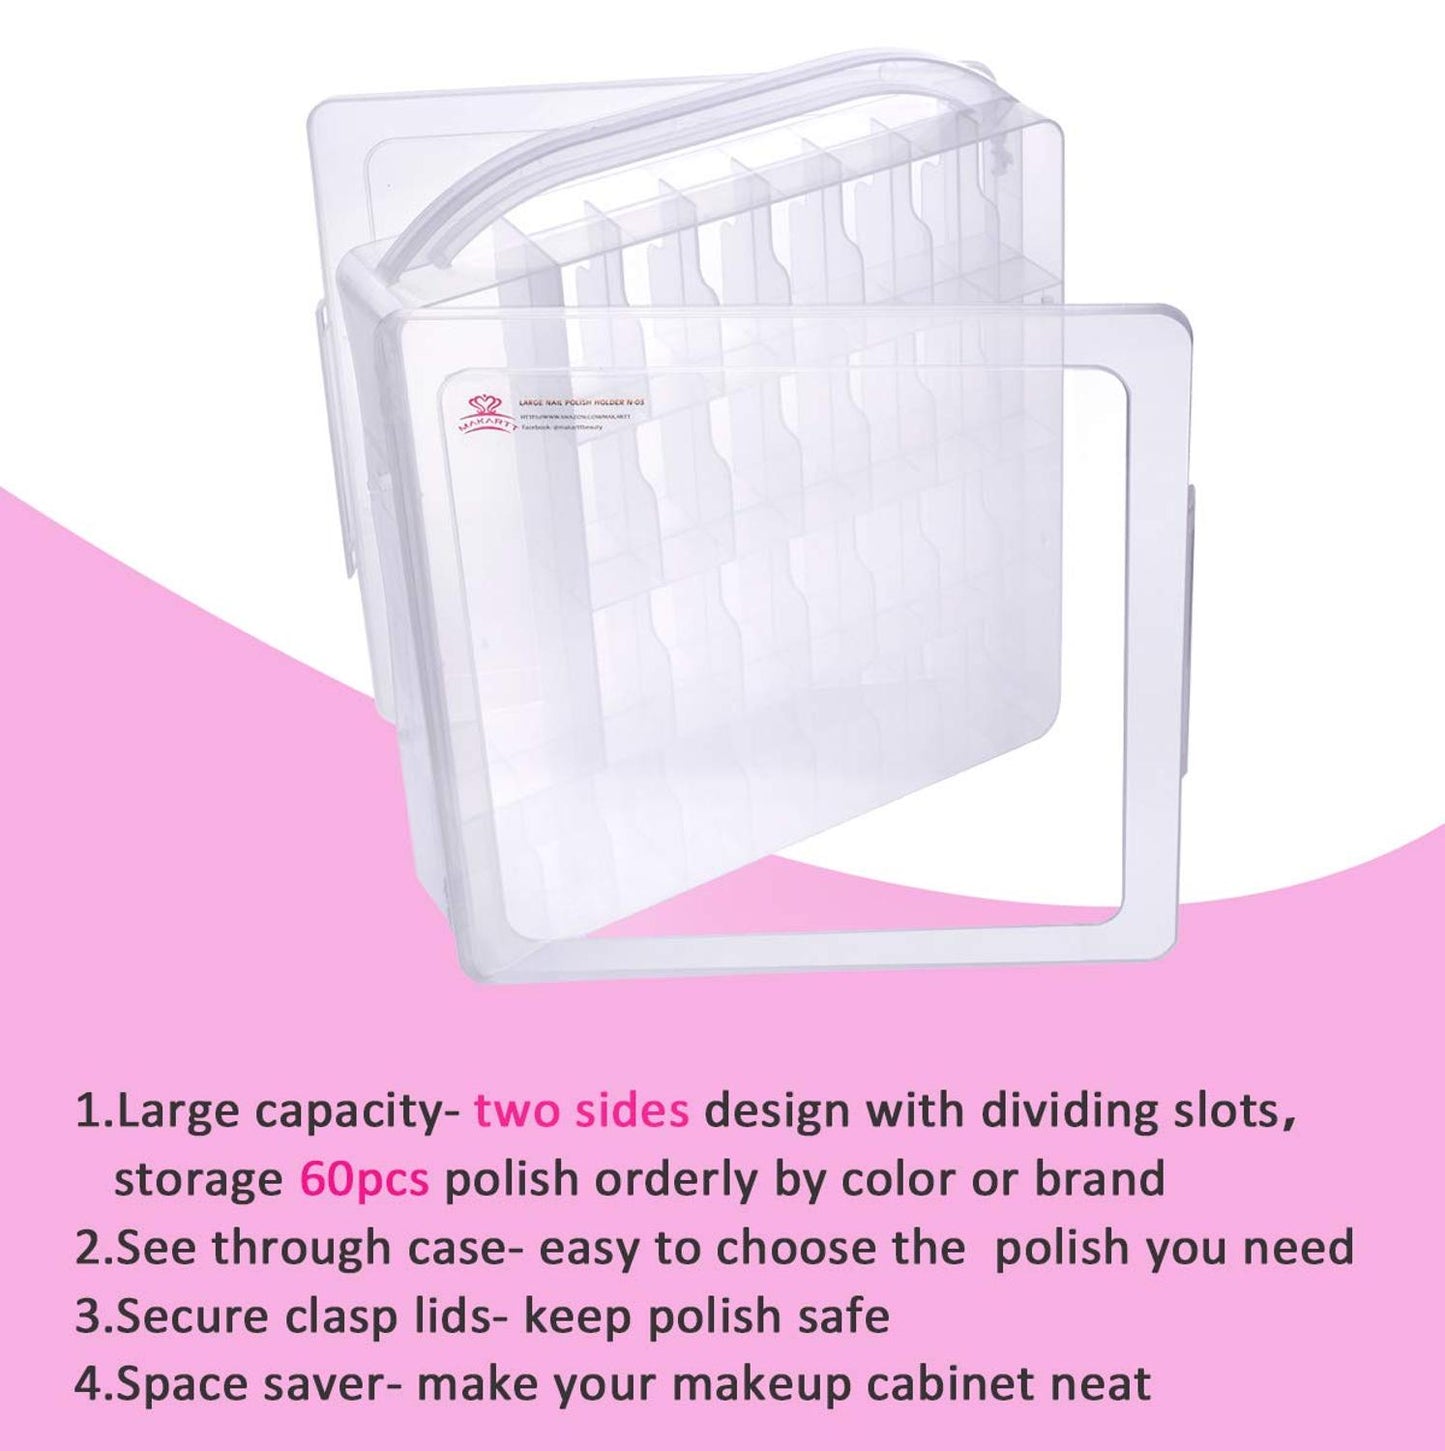 Makartt Professional Nail Polish Holder Organizer for 48 / 60 Bottles with Large Separate Compartment for Tools  Storage Box